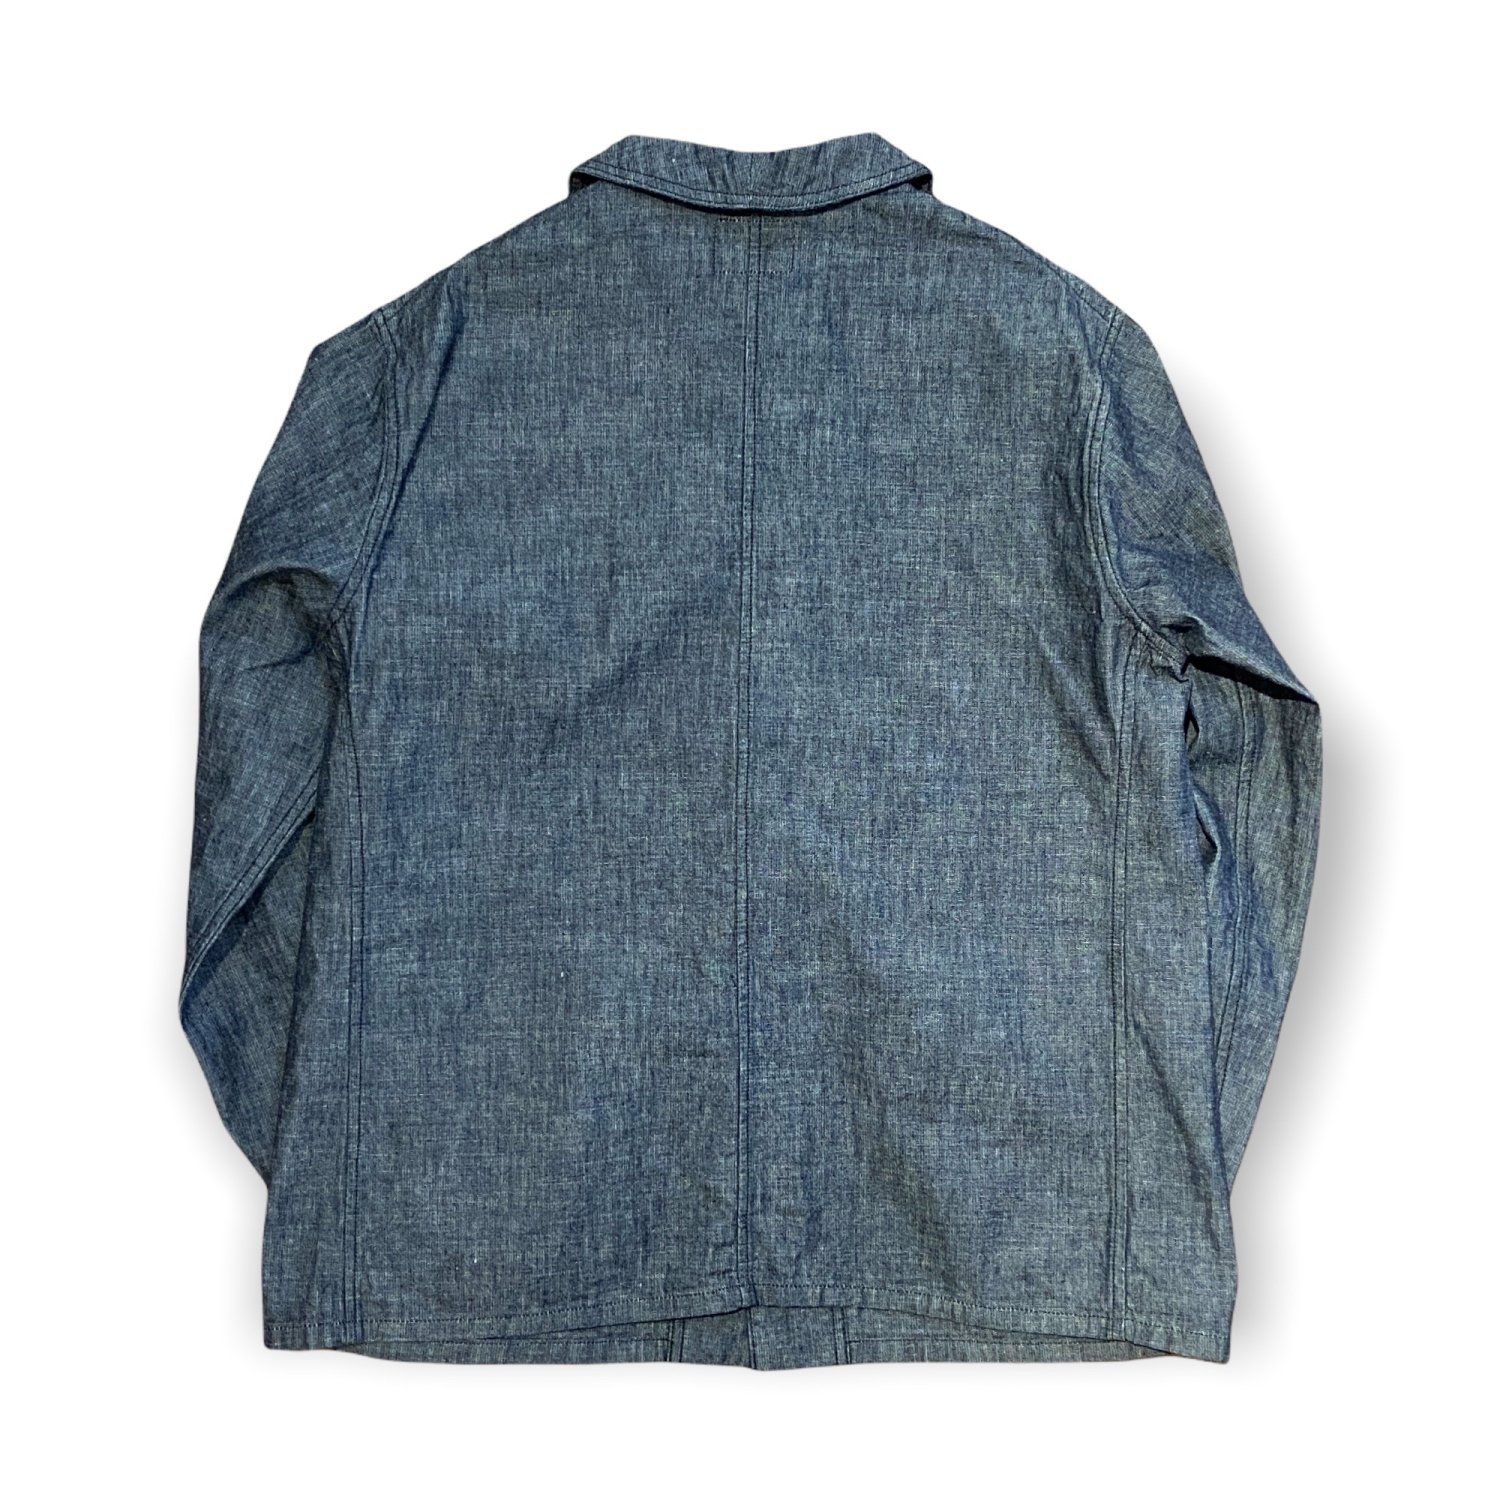 BONCOURA French Work Jacket Dungaree Cotton Linen